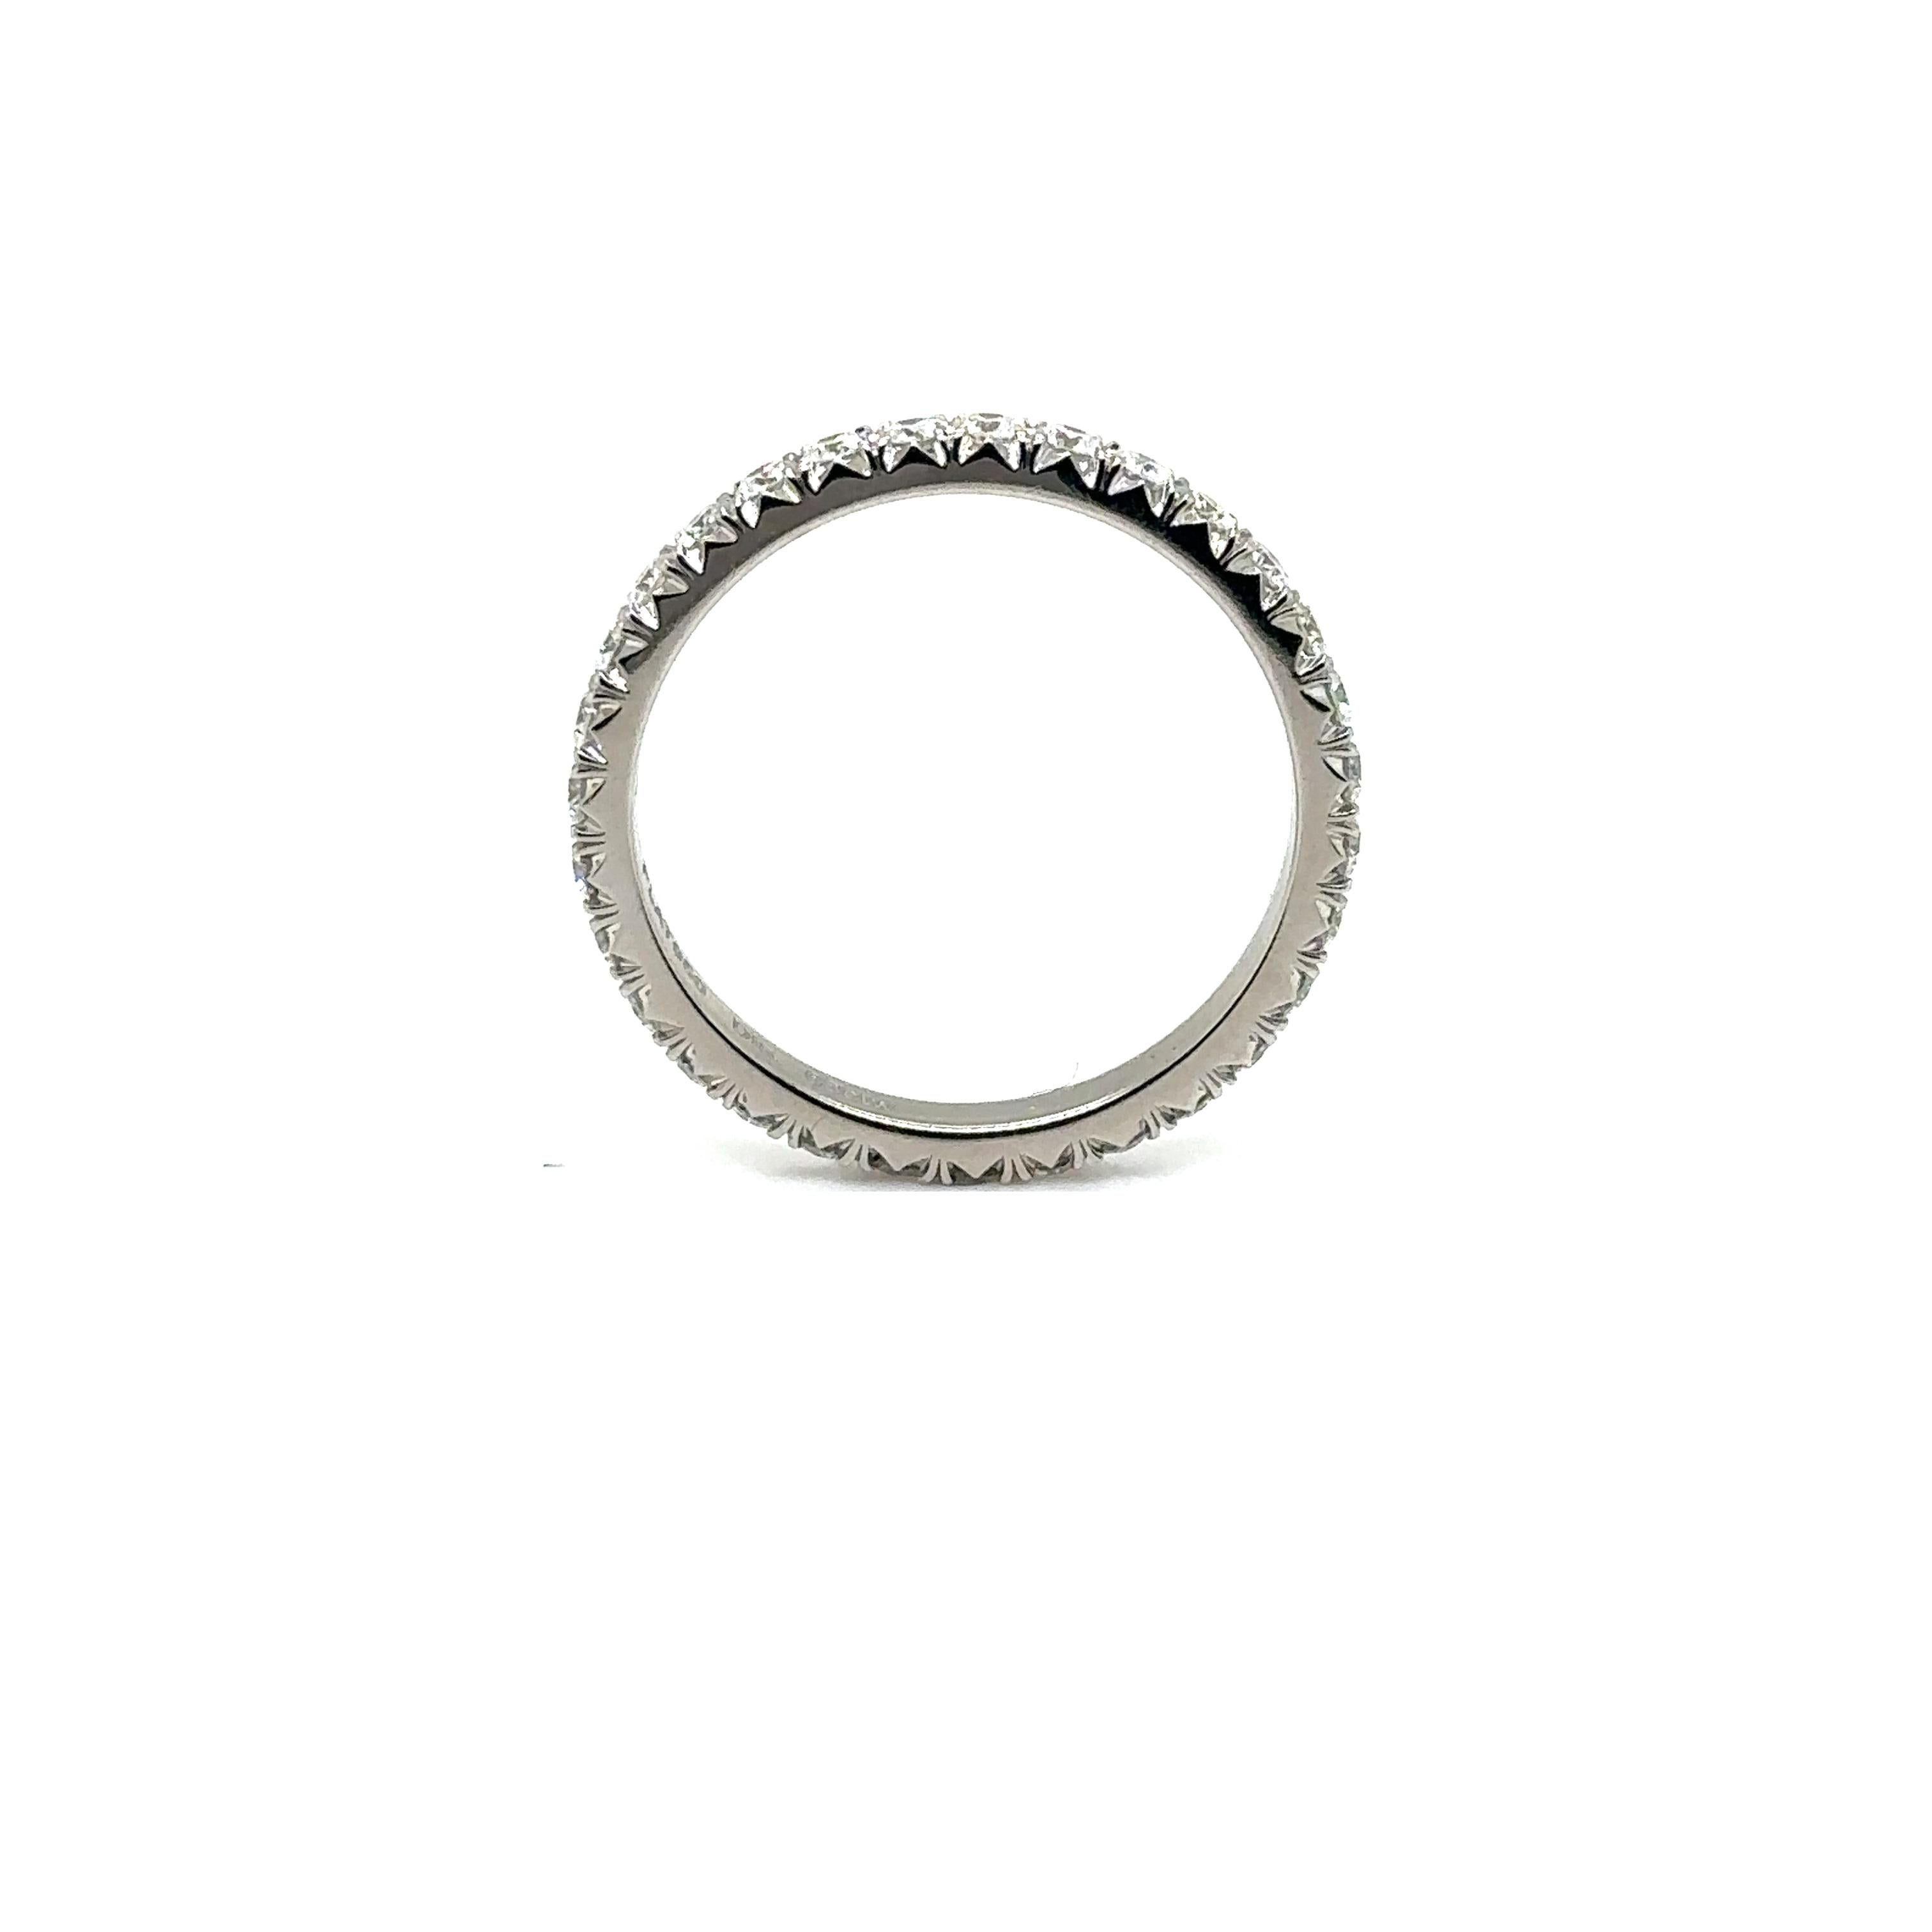 WB31 PLAT - PLATINUM WEDDING BAND with 0.68 CWT DIAMONDS For Sale 4